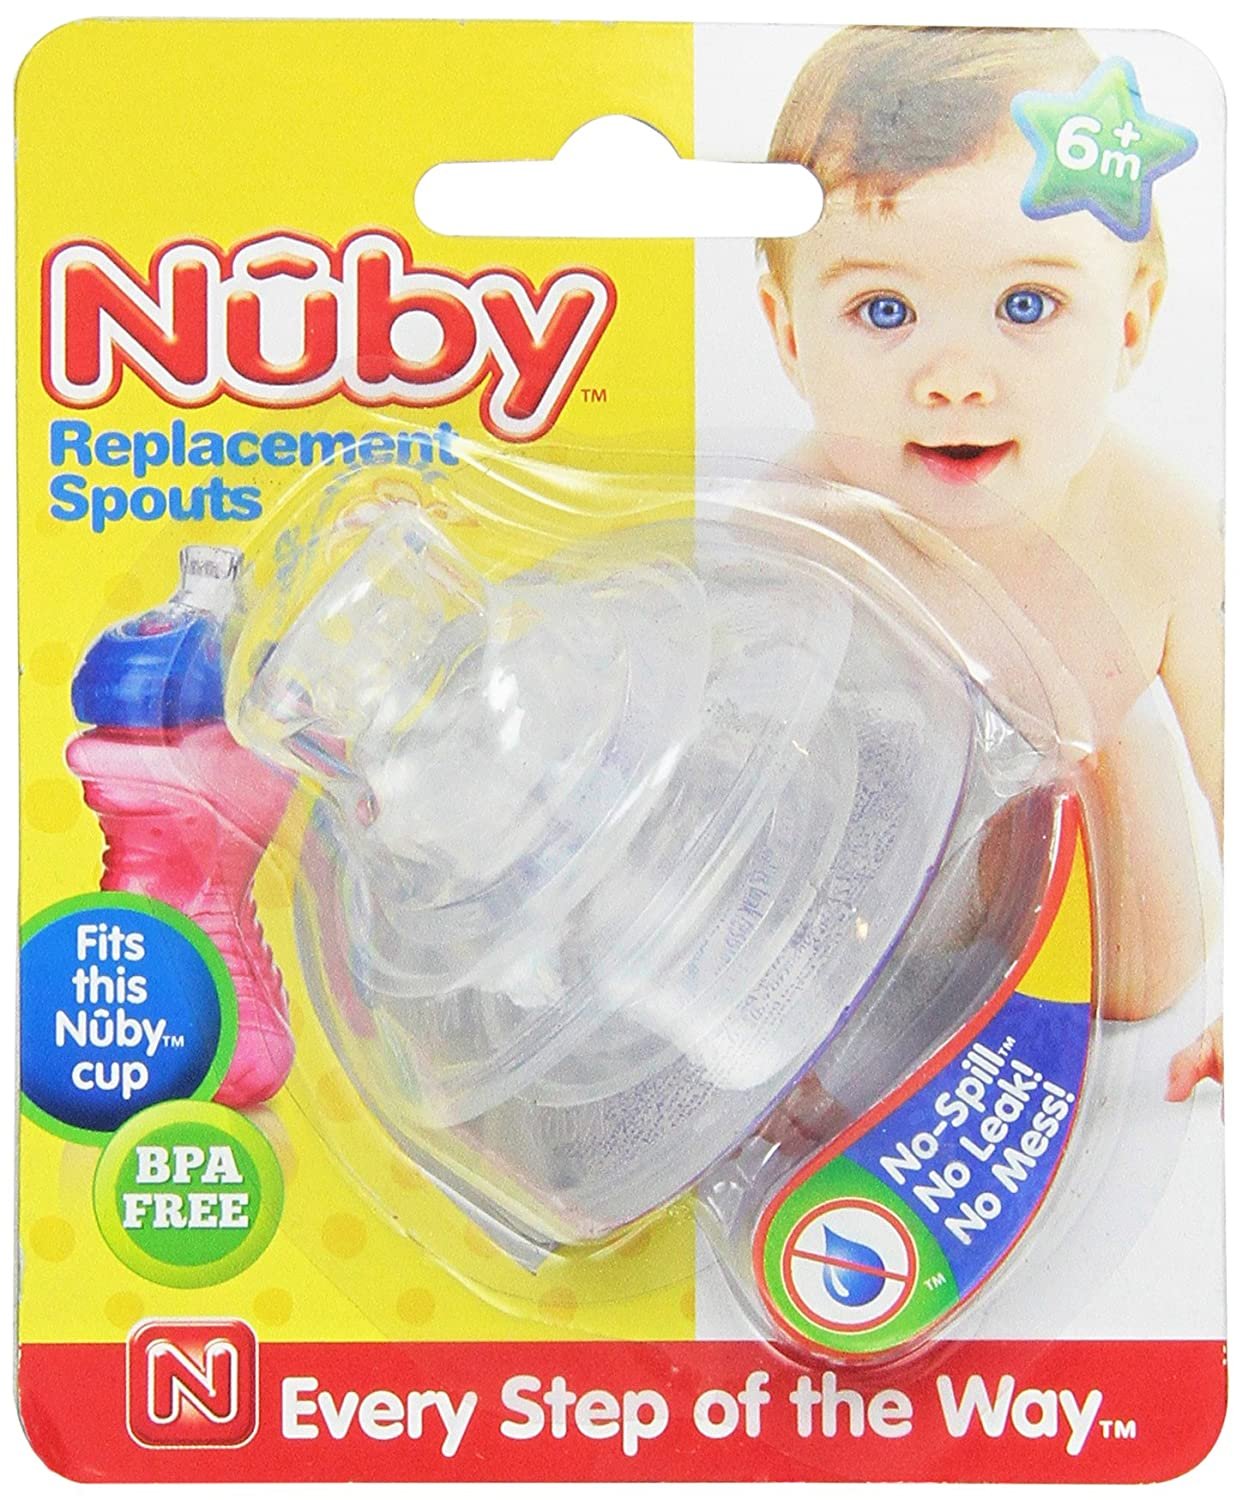 Nuby No Spill Cup With Reversible Valve, 9 Ounce ,Blue 